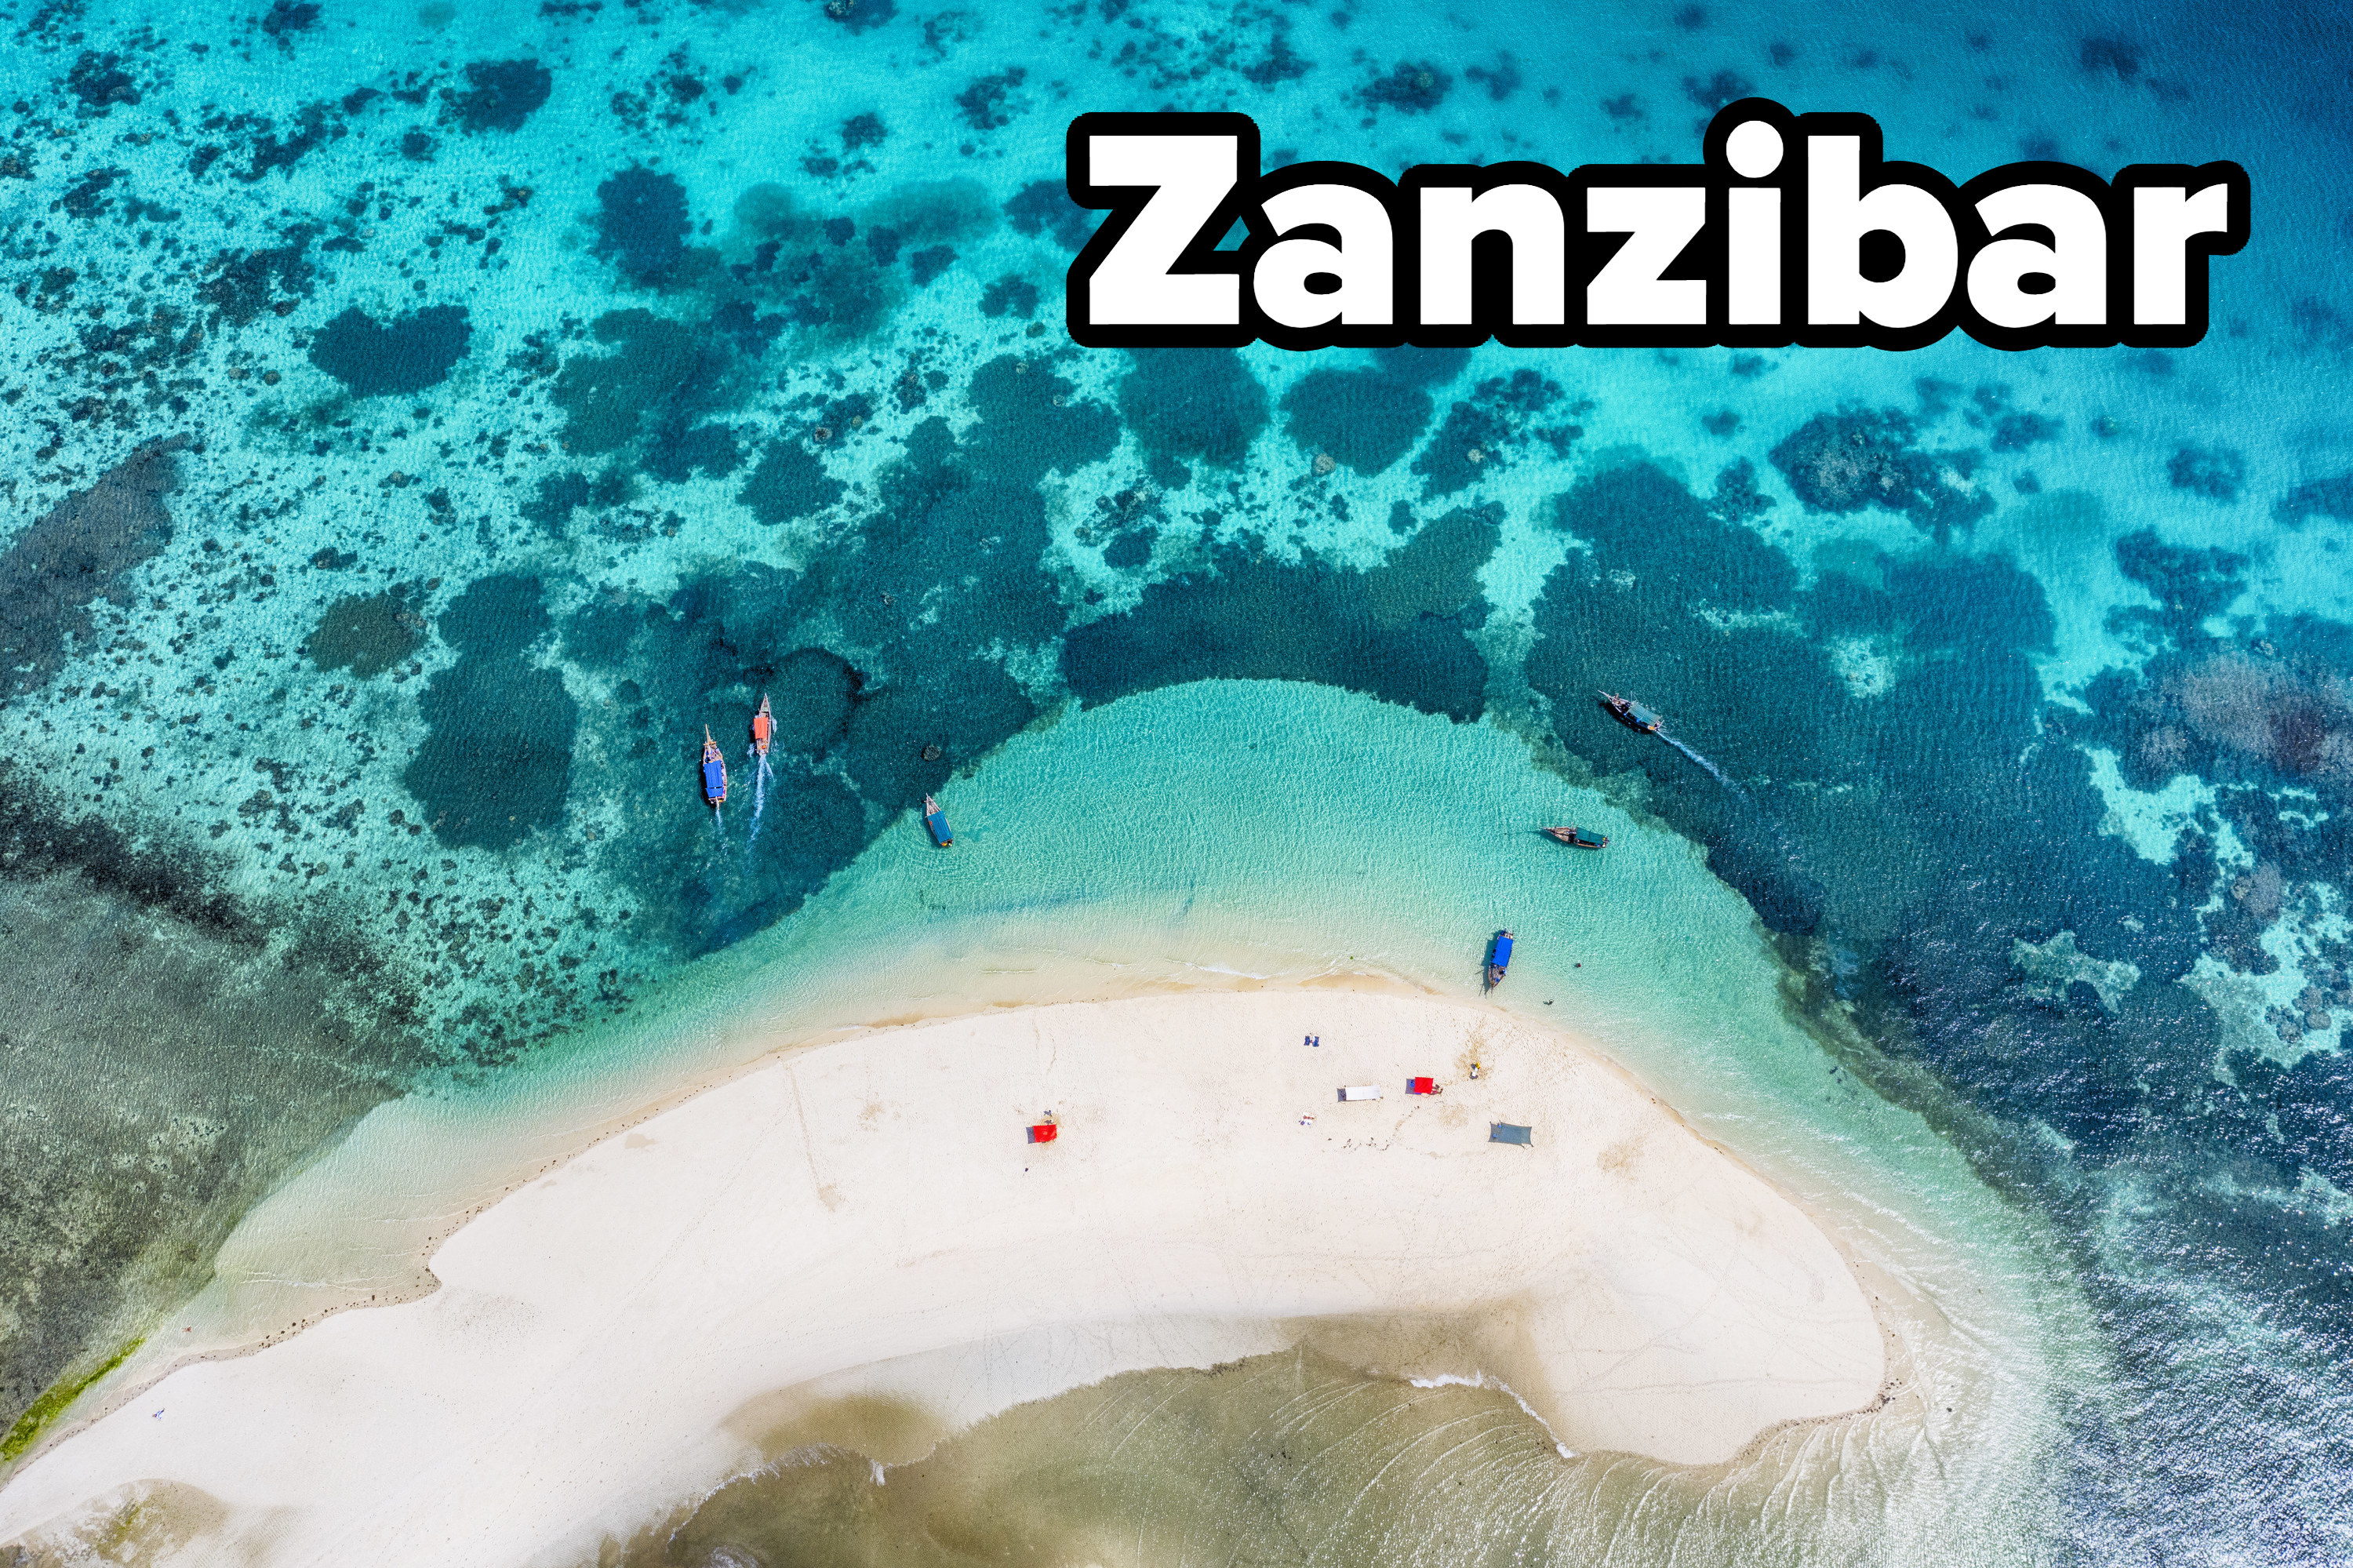 Aerial view of a small sandy island (sand bank) with tourist boats and tourists in the Indian Ocean. Location: Menai Bay, Zanzibar, Tanzania.